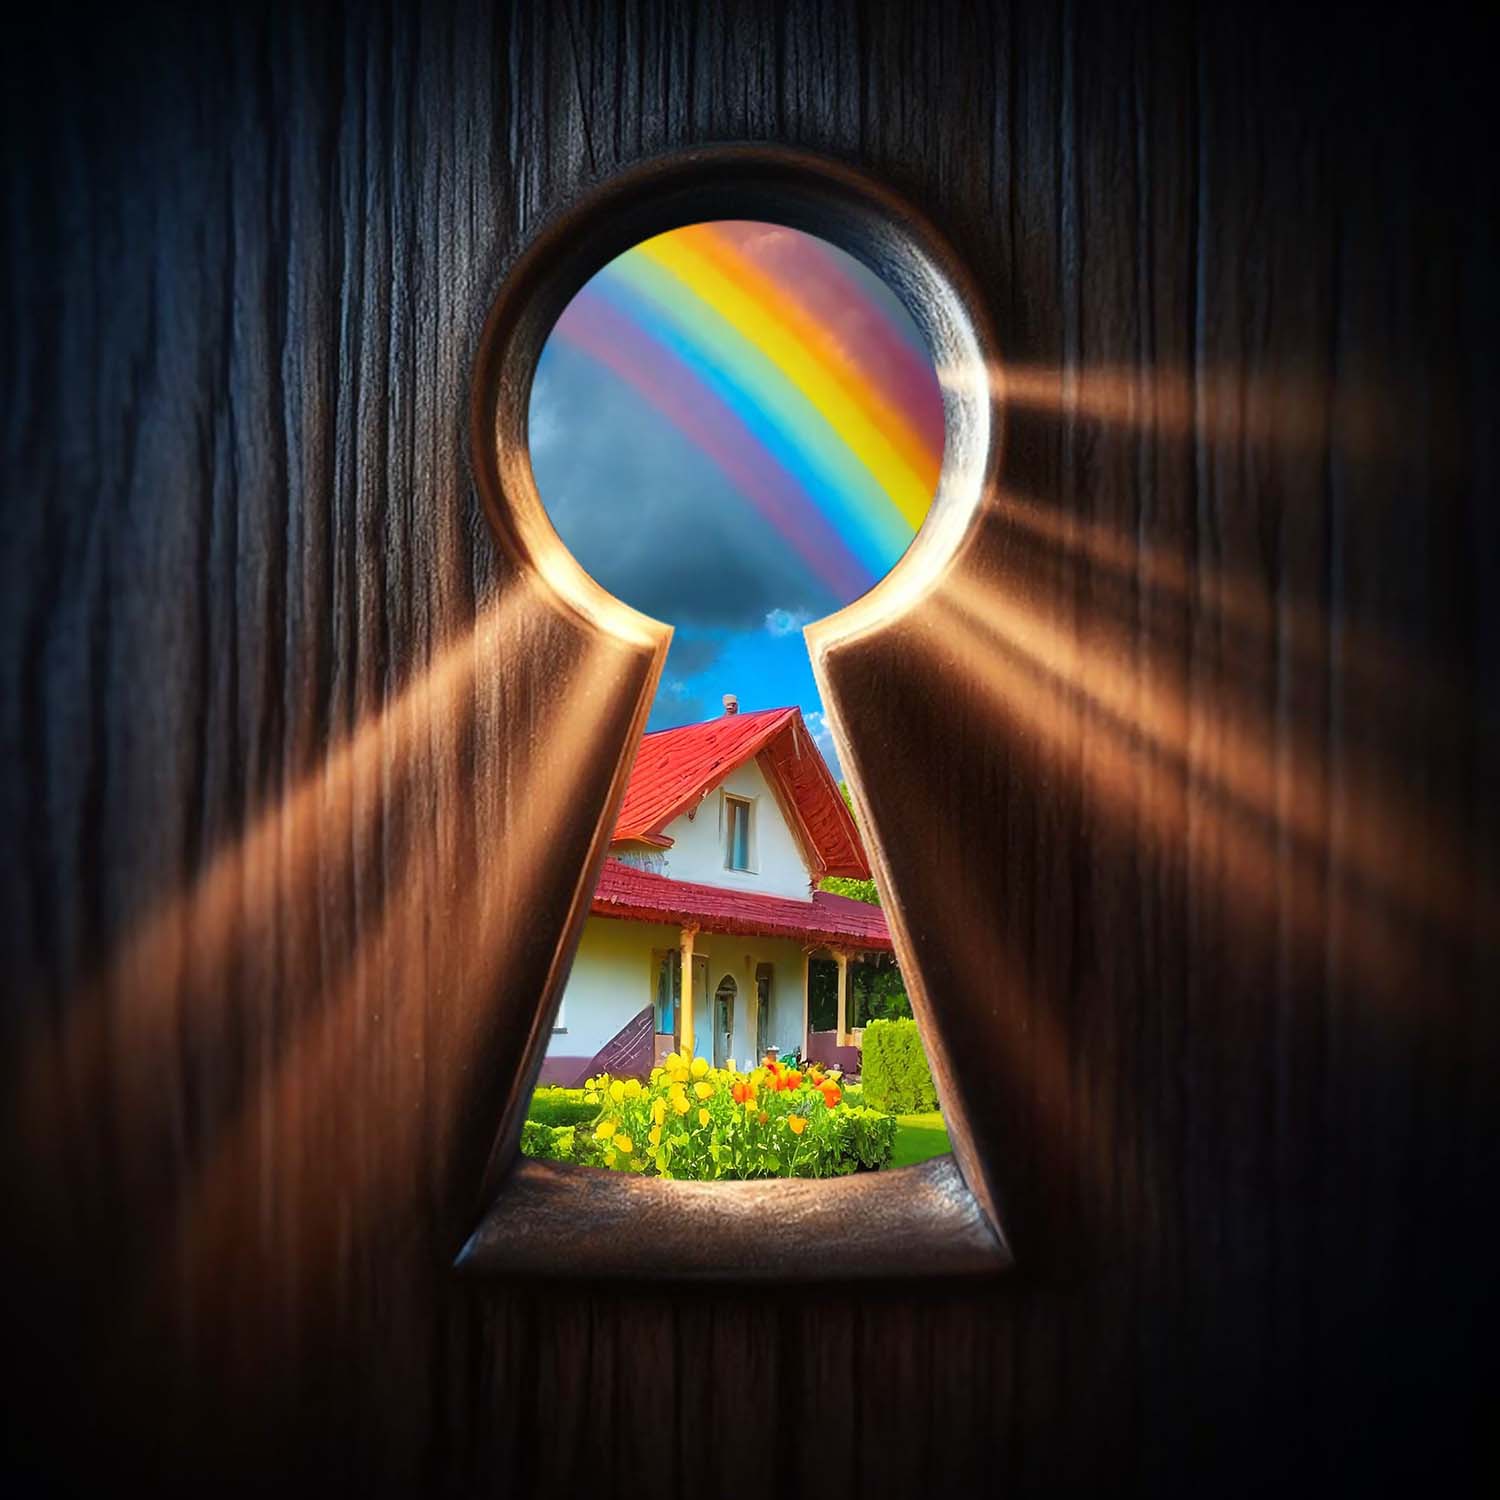 Light shining through the keyhole of a wooden door with a bright house visible through the hole.